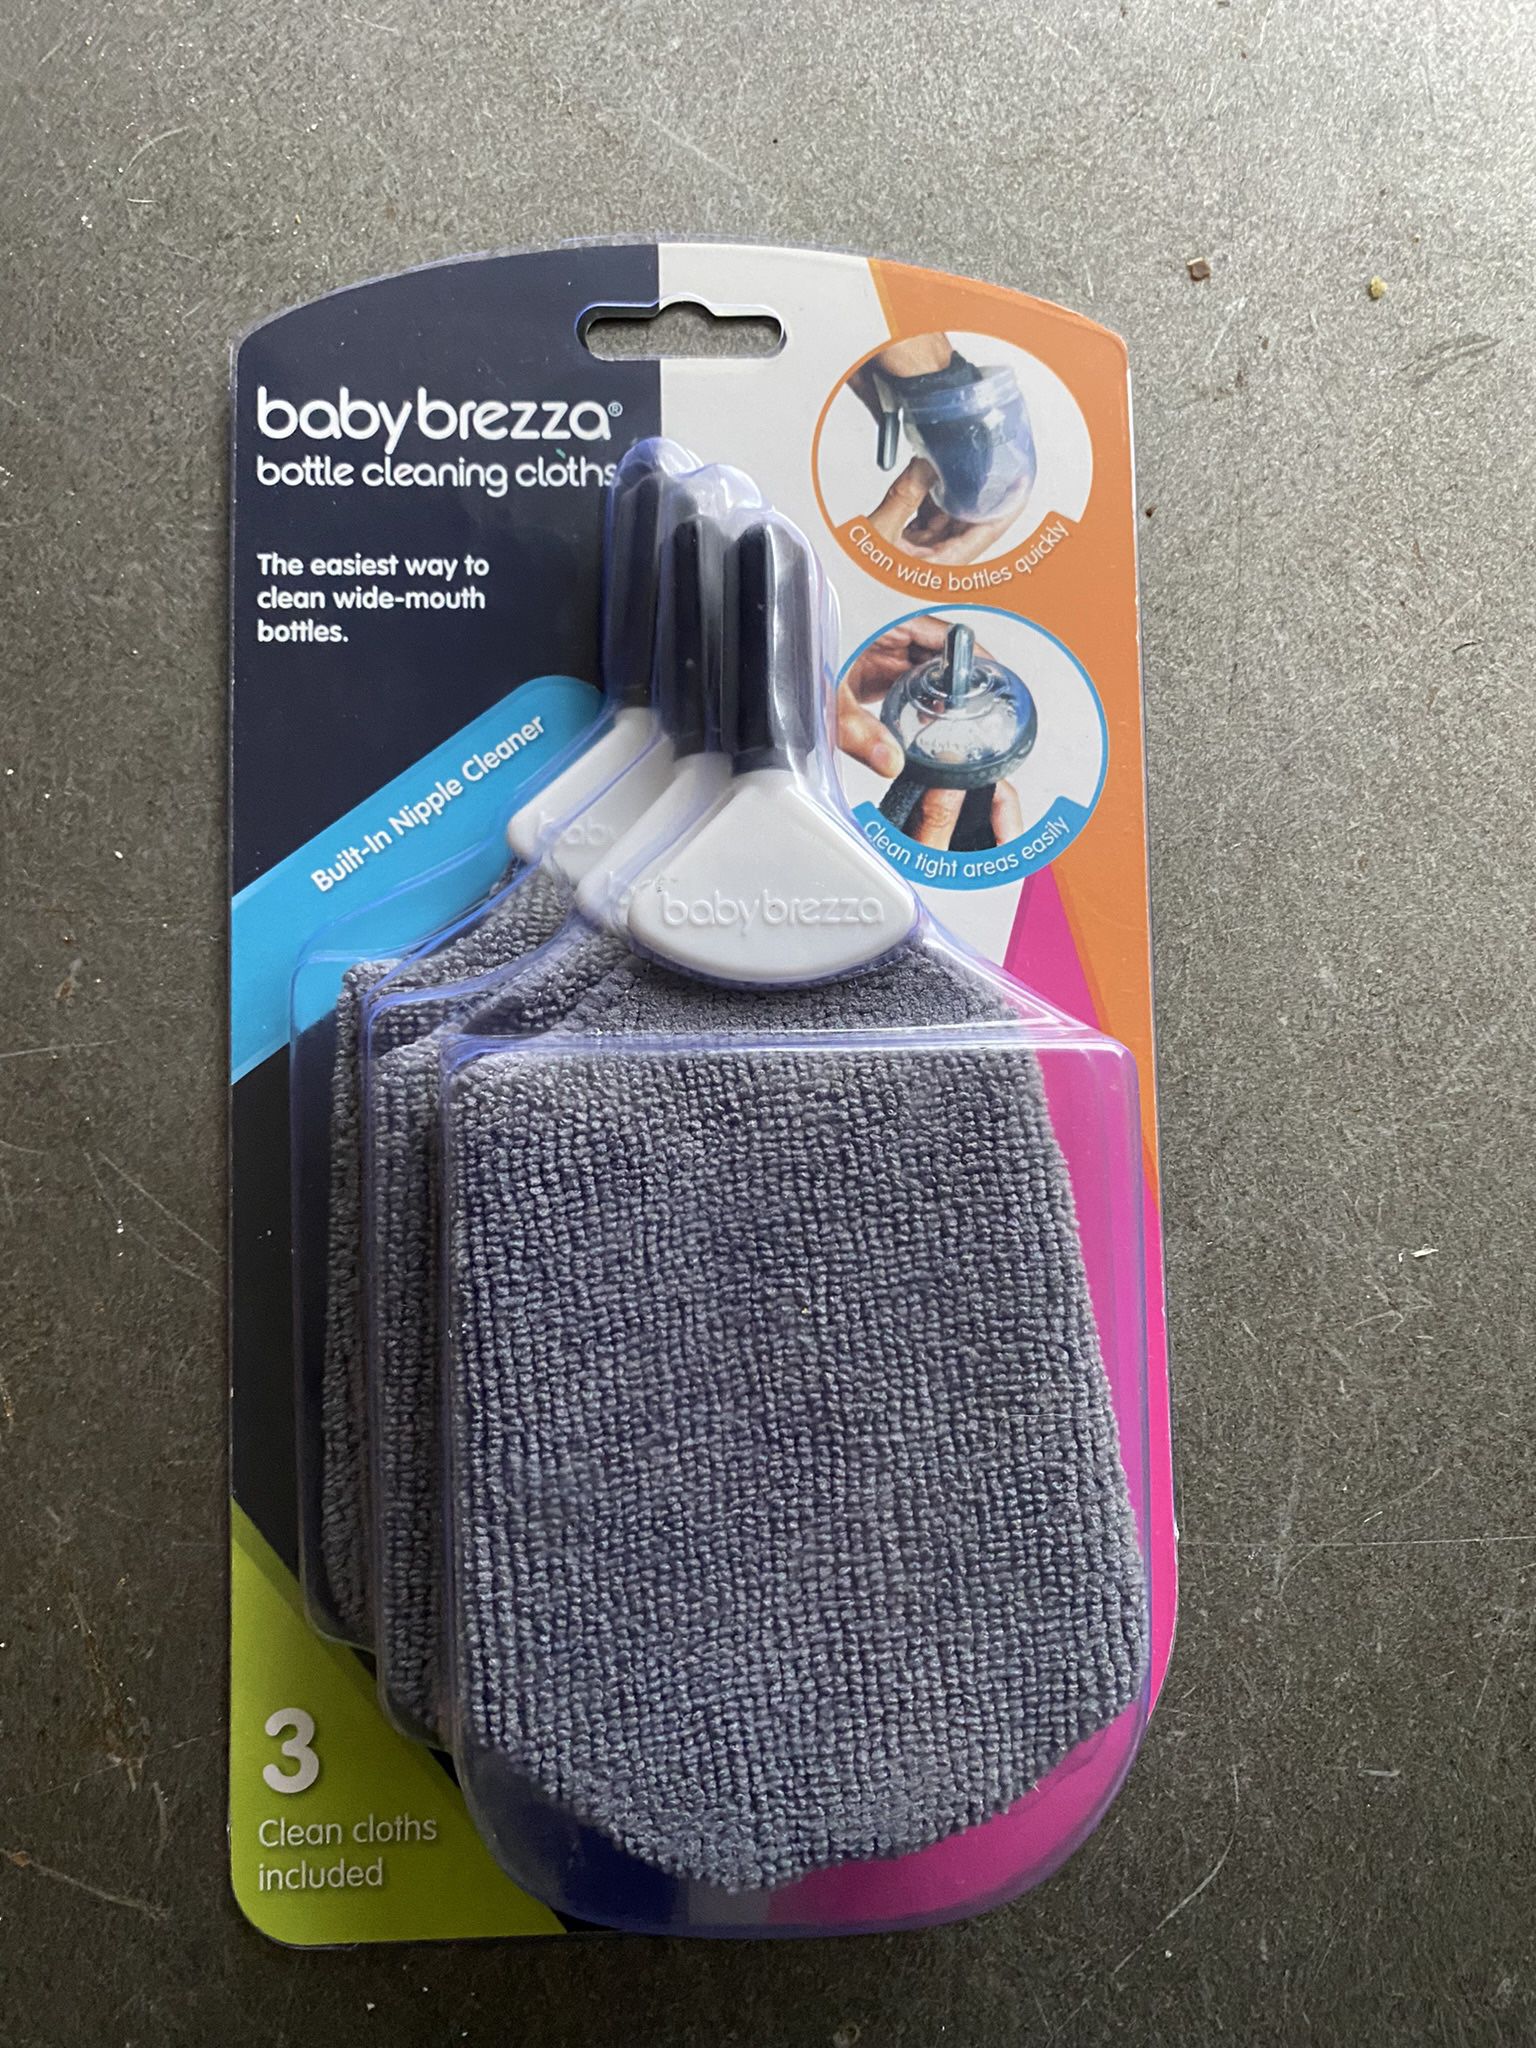 Baby Breeza Bottle Cleansing Cloths 